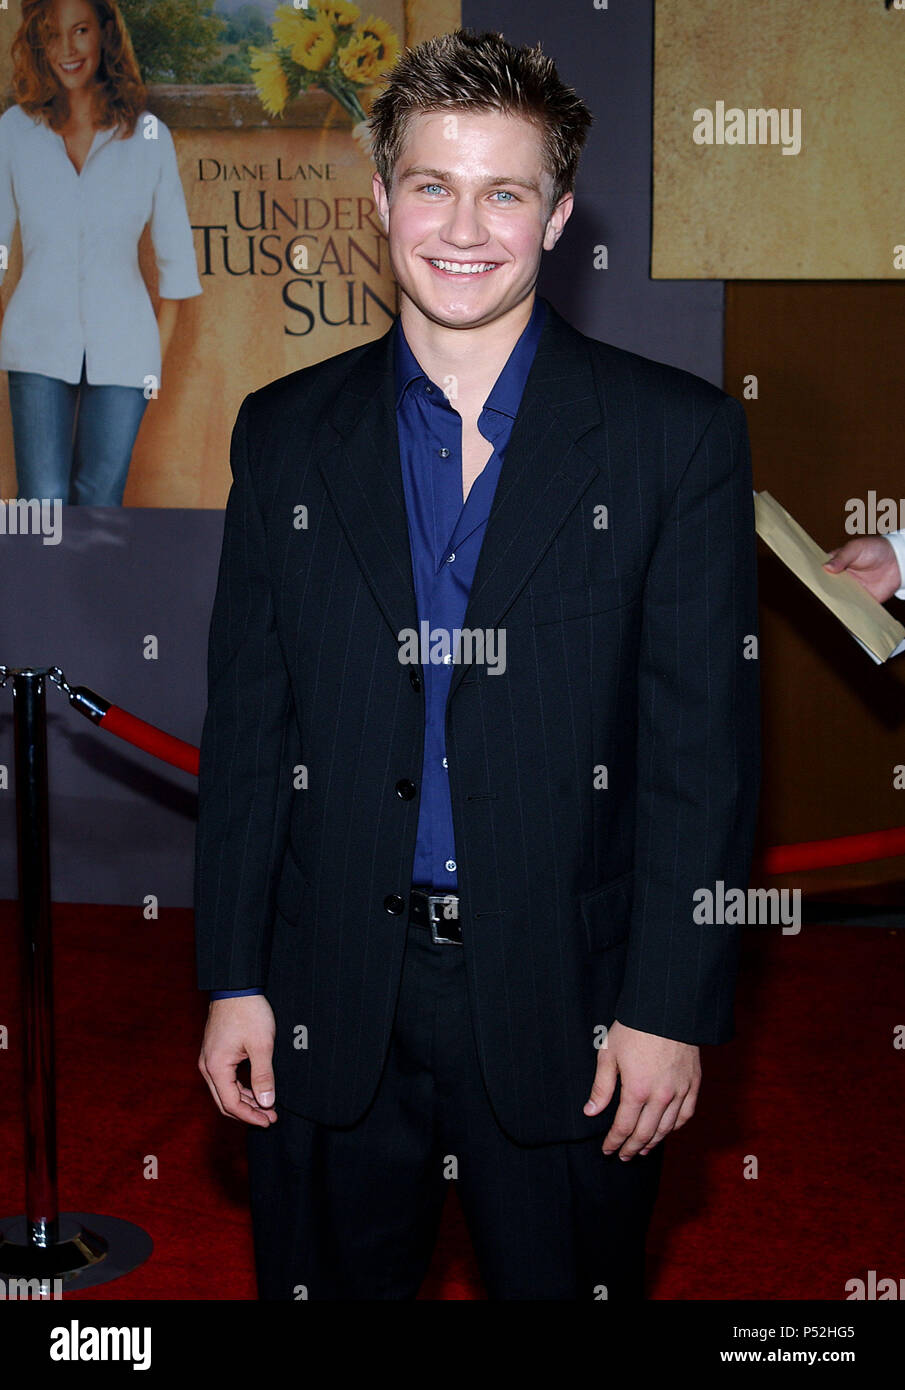 Pawel Szajda arriving at the Premiere of ' Under The Tuscan Sun ' at the El Capitan Theatre in Los Angeles. September 20, 2003.SzajdaPawel016 Red Carpet Event, Vertical, USA, Film Industry, Celebrities,  Photography, Bestof, Arts Culture and Entertainment, Topix Celebrities fashion /  Vertical, Best of, Event in Hollywood Life - California,  Red Carpet and backstage, USA, Film Industry, Celebrities,  movie celebrities, TV celebrities, Music celebrities, Photography, Bestof, Arts Culture and Entertainment,  Topix, vertical, one person,, from the years , 2003 to 2005, inquiry tsuni@Gamma-USA.com Stock Photo